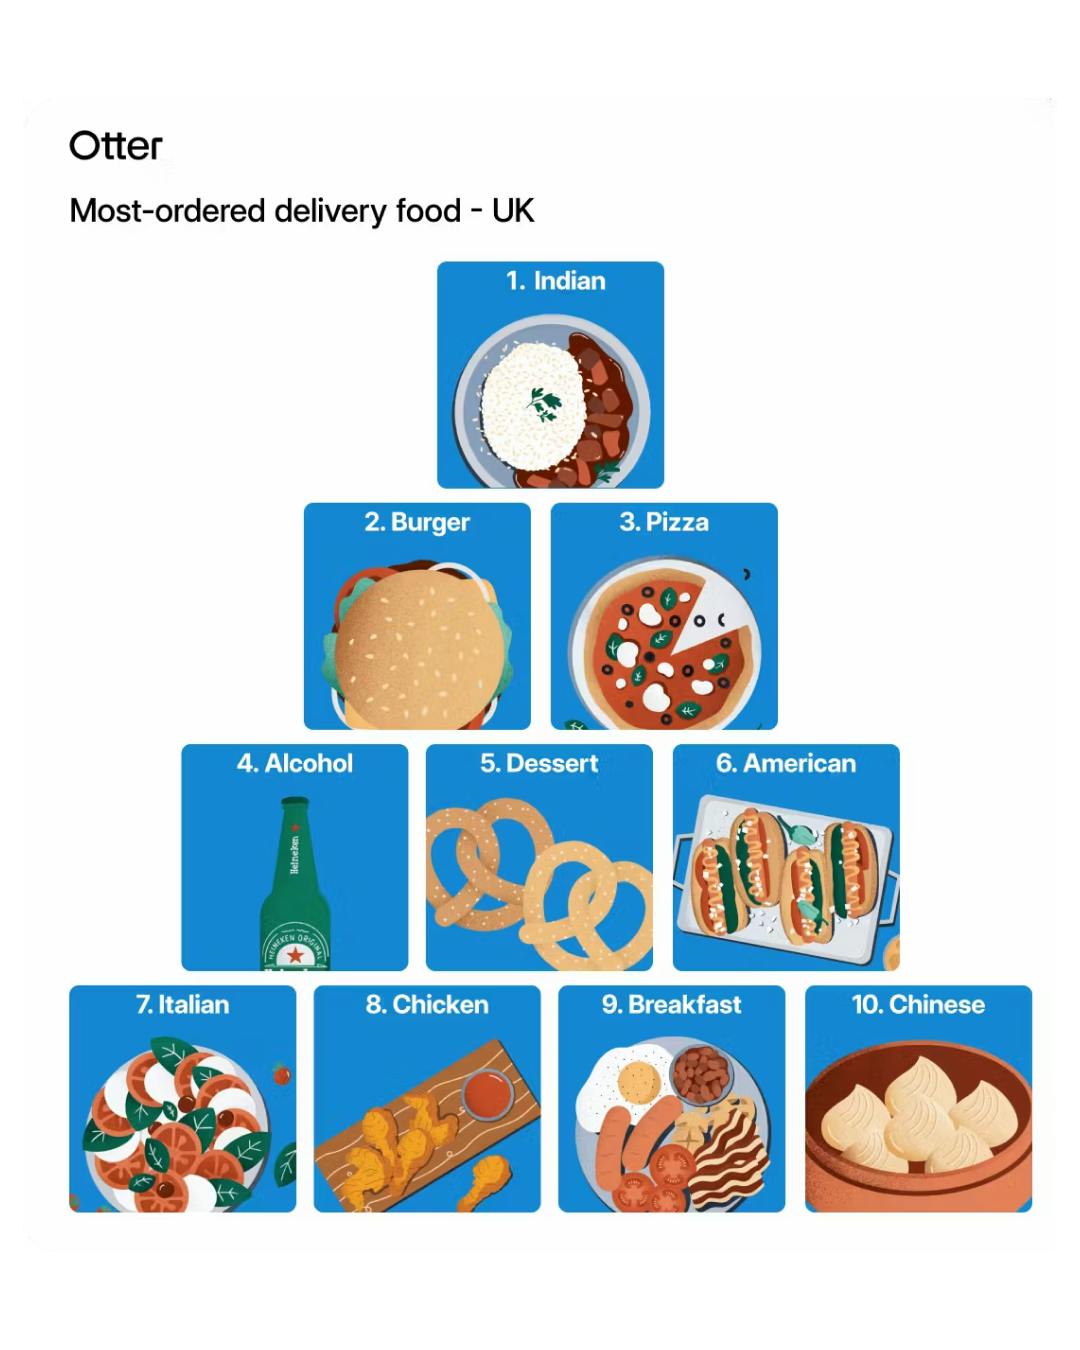 Most ordered delivery food in the UK